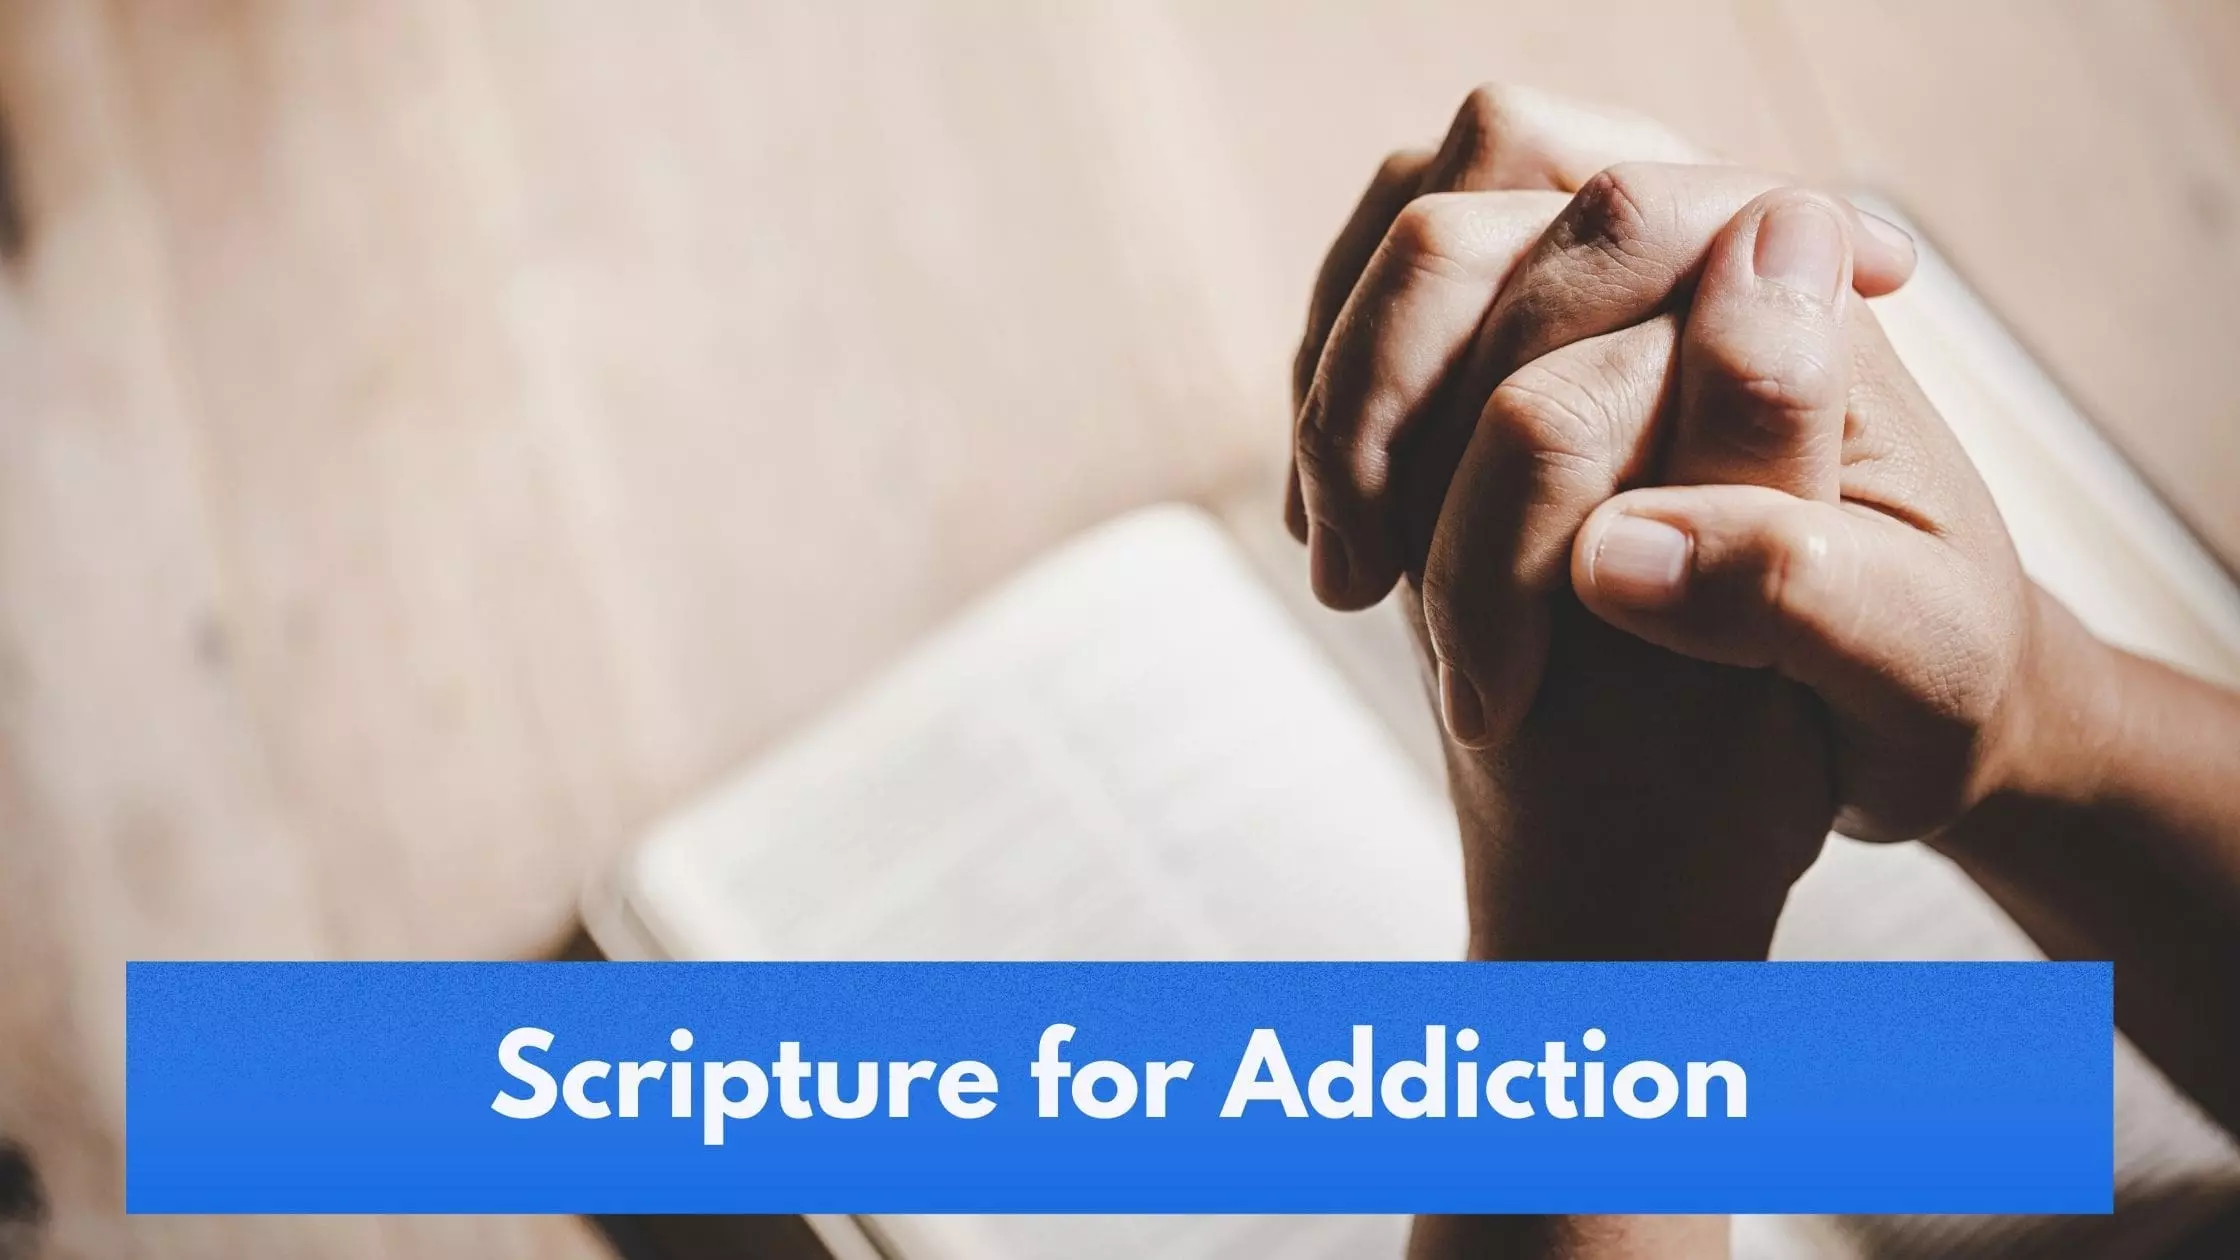 Scripture for Addiction Images